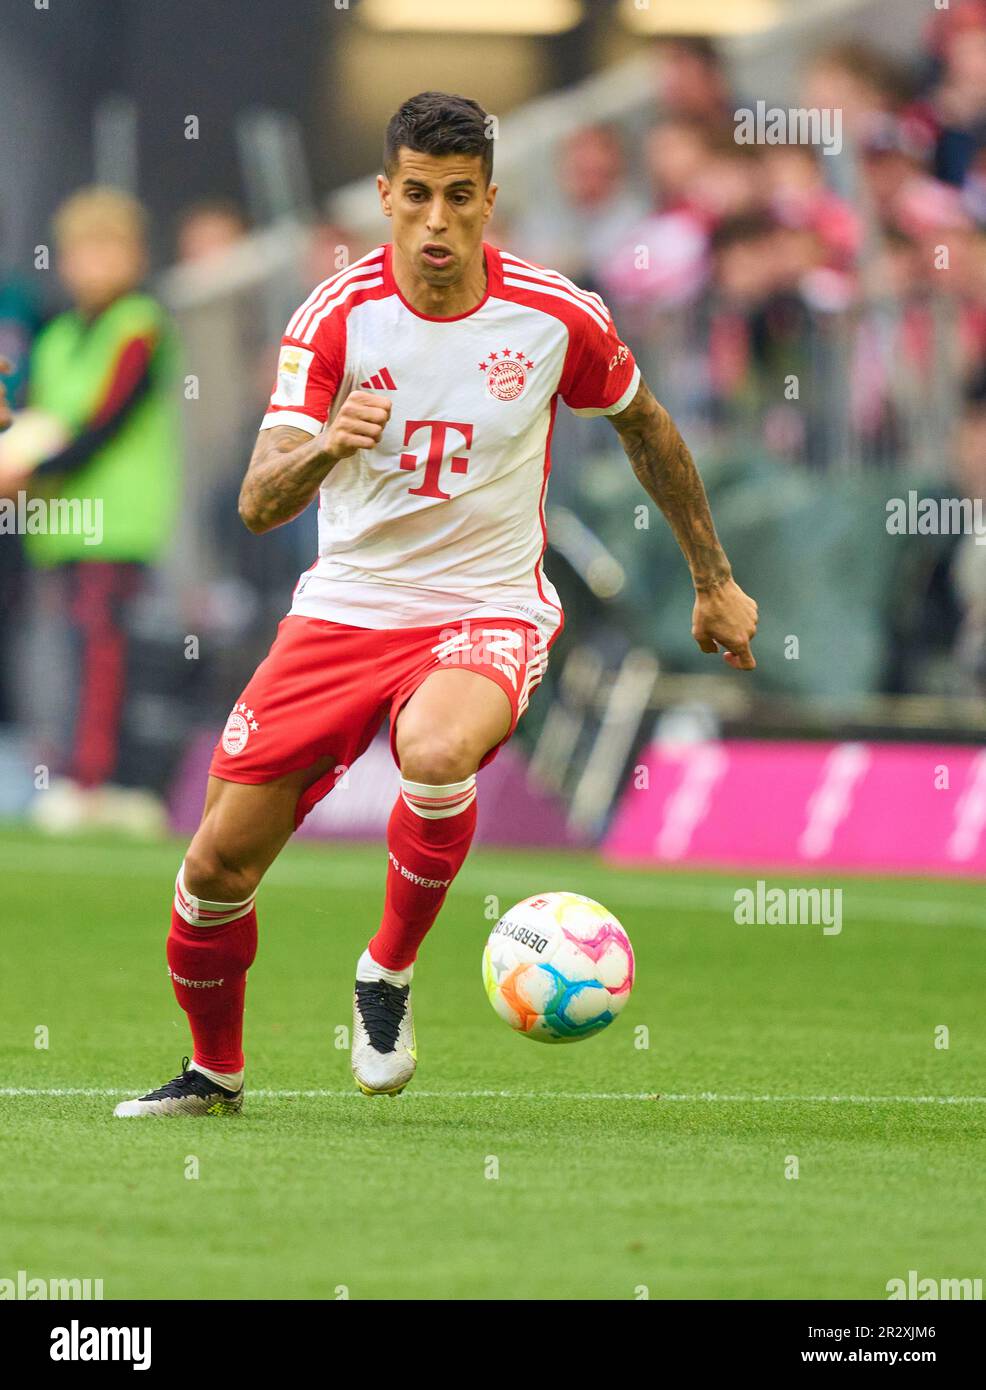 Joao Cancelo, FCB 22  in the match FC BAYERN MUENCHEN - RB LEIPZIG 1-3 1.German Football League on May 20, 2023 in Munich, Germany. Season 2022/2023, matchday 33, 1.Bundesliga, FCB, München, 33.Spieltag. © Peter Schatz / Alamy Live News    - DFL REGULATIONS PROHIBIT ANY USE OF PHOTOGRAPHS as IMAGE SEQUENCES and/or QUASI-VIDEO - Stock Photo